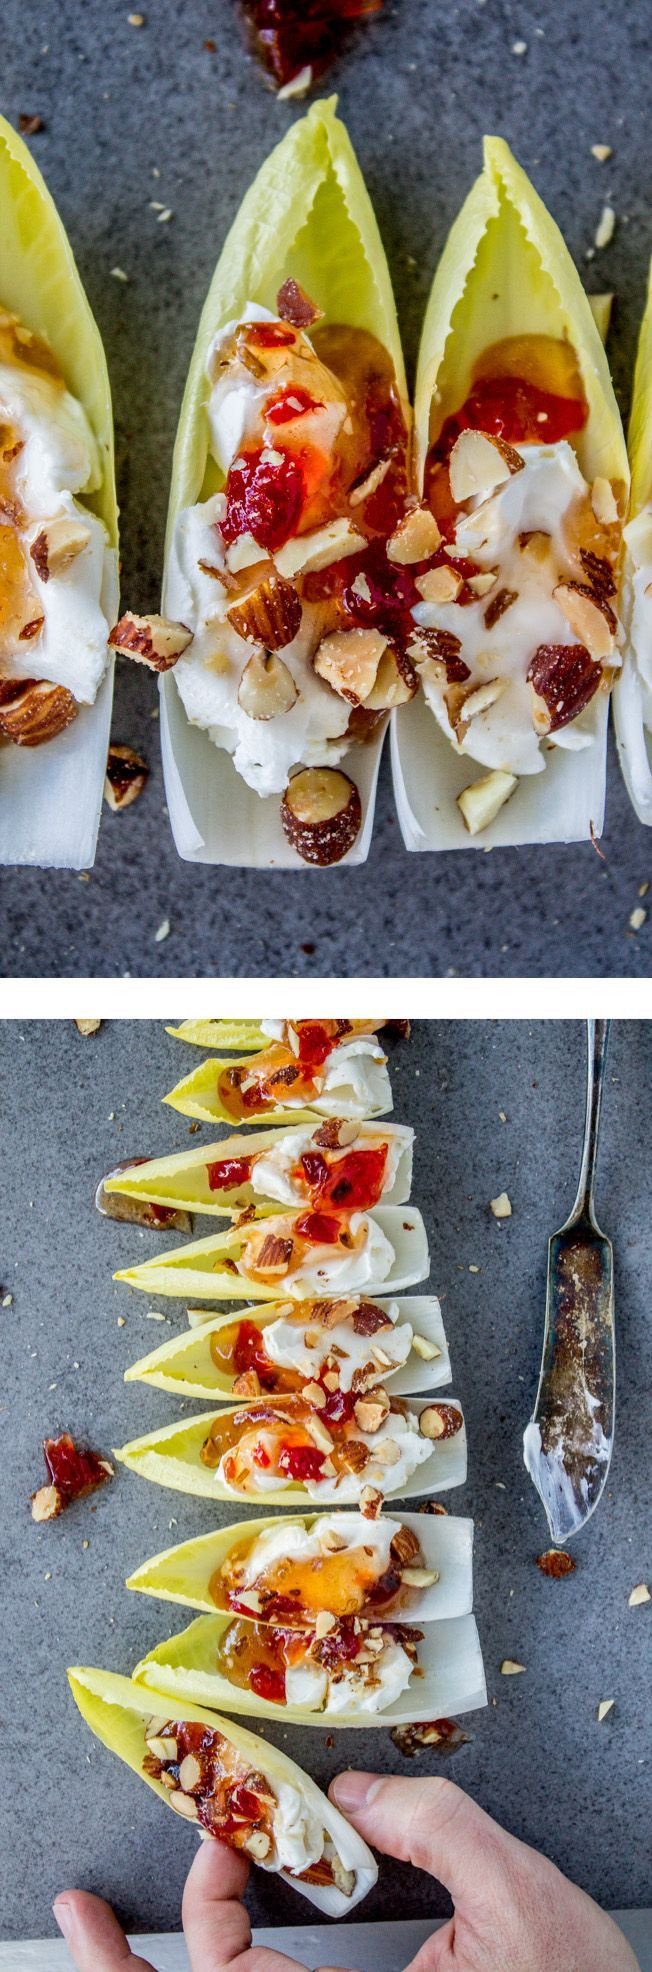 Heavy Appetizers For Christmas Party
 Best 25 Heavy appetizers ideas on Pinterest